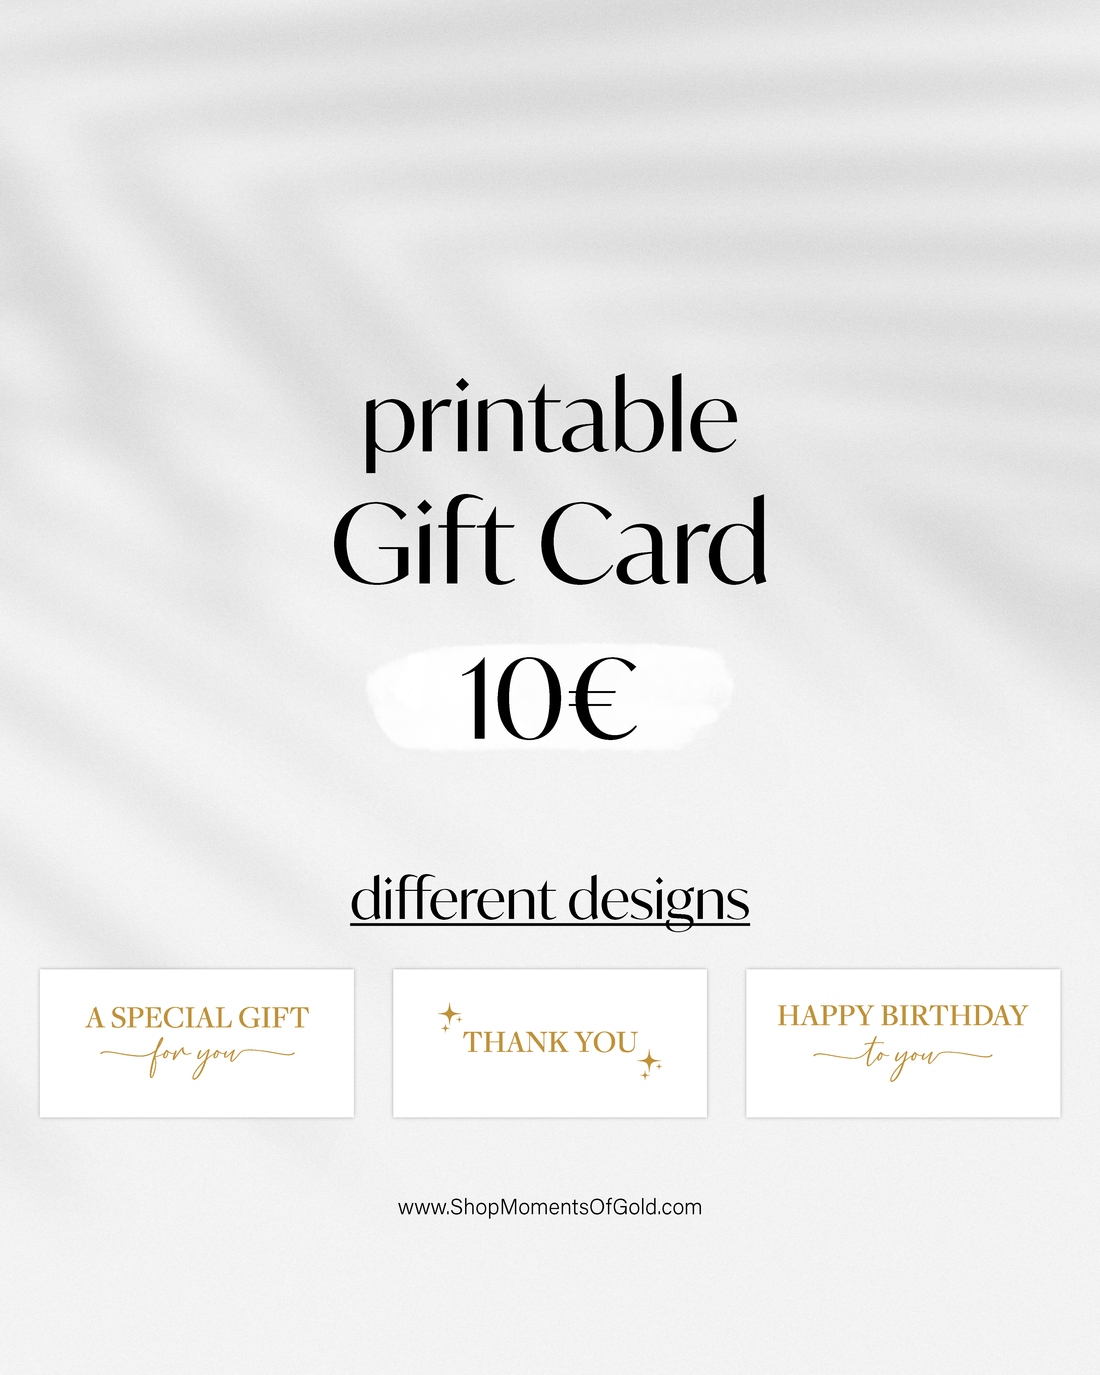 printable 10€ gift card with different designs